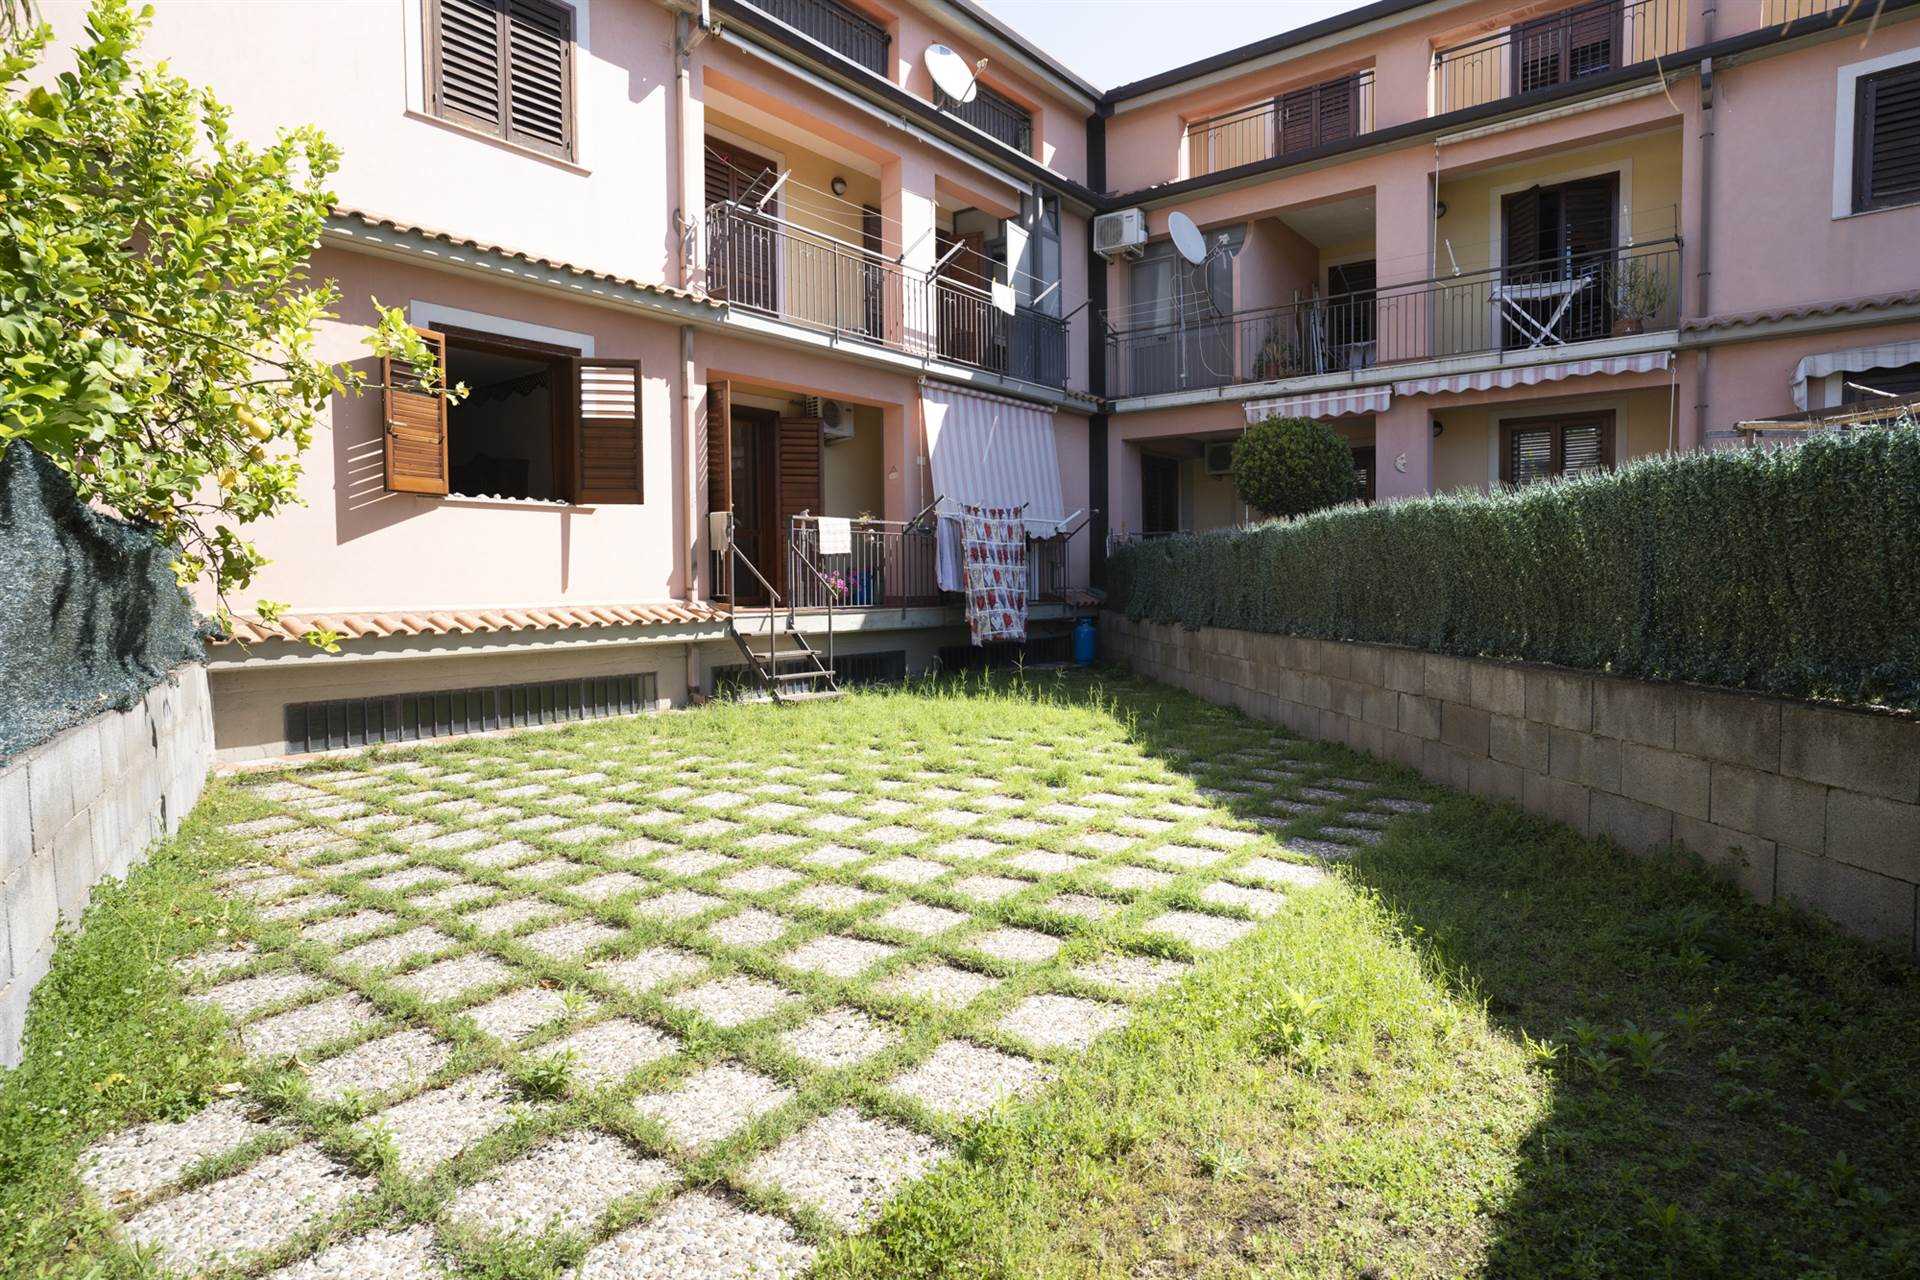 ACI CATENA, Apartment for sale of 115 Sq. mt., Good condition, Heating Individual heating system, Energetic class: E, Epi: 73,46 kwh/m2 year, placed 